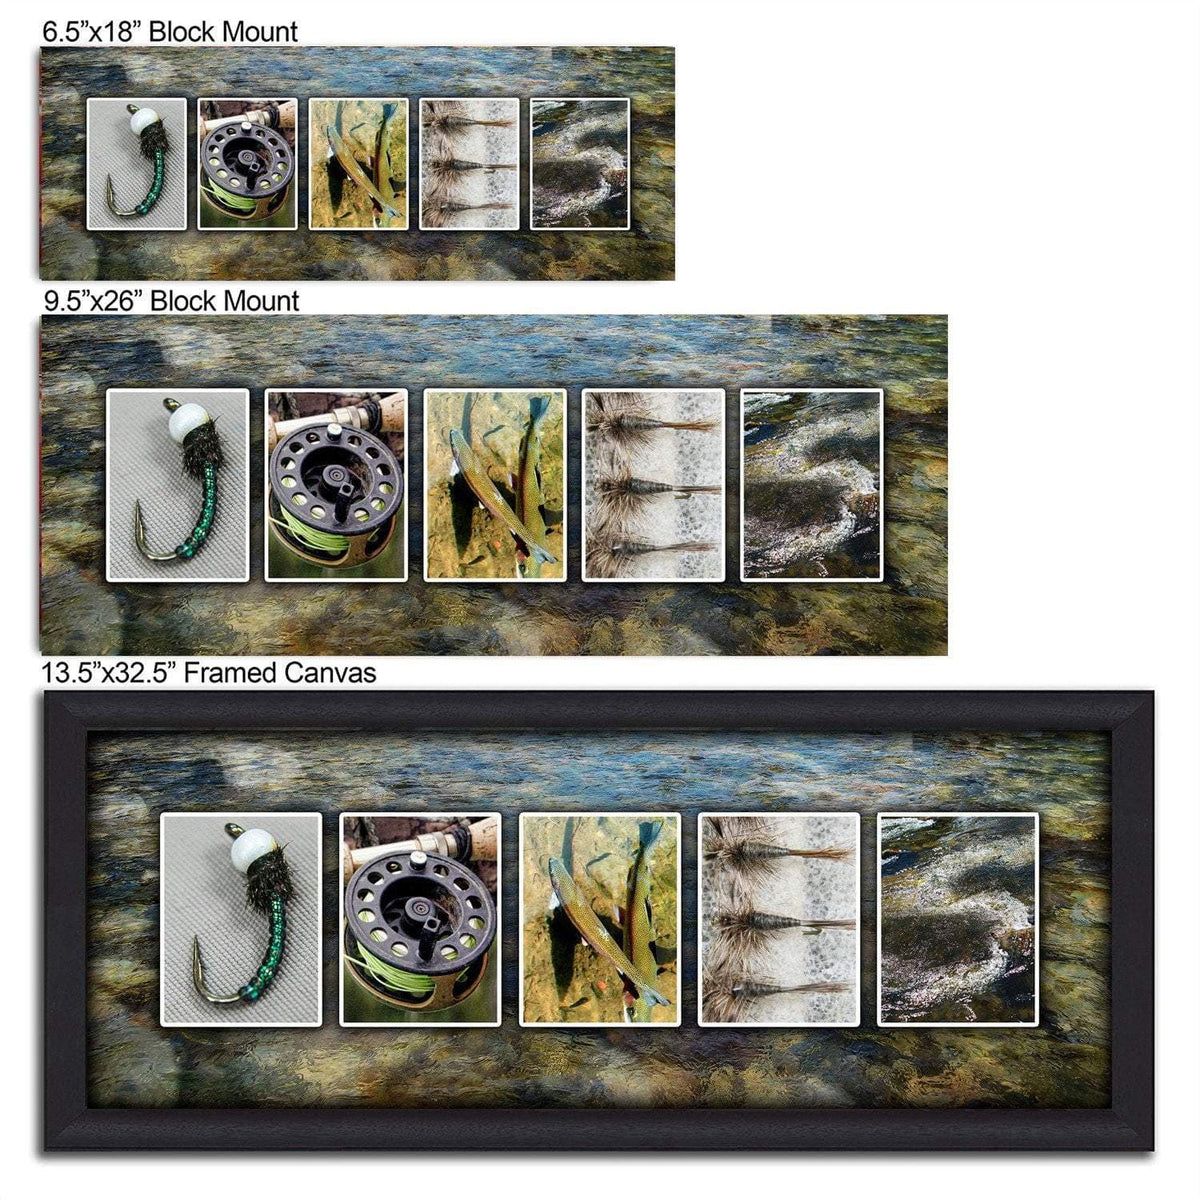 Personal Prints Personalized Fly Fishing Name Art - Perfect for The Fly Fisher Man Cave Office or Boys Room! Block Mount - 9